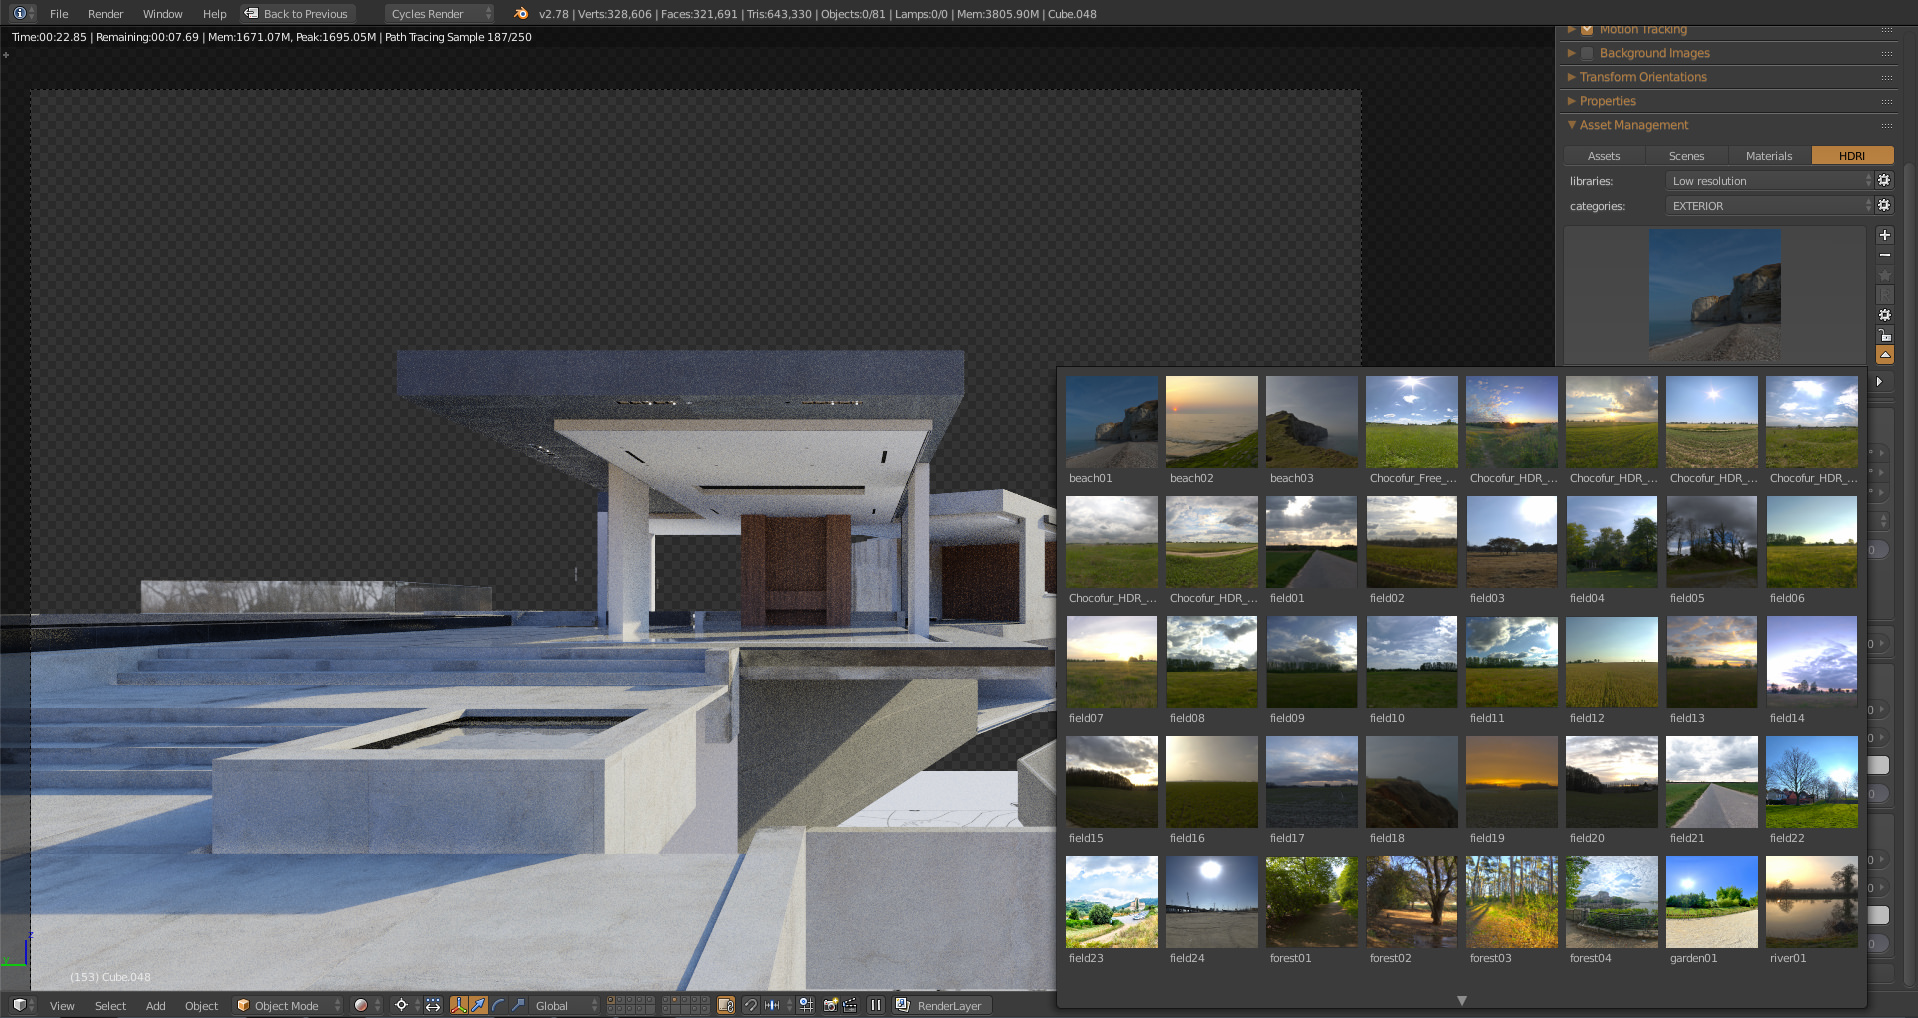 HDRI maps stored in Asset manager